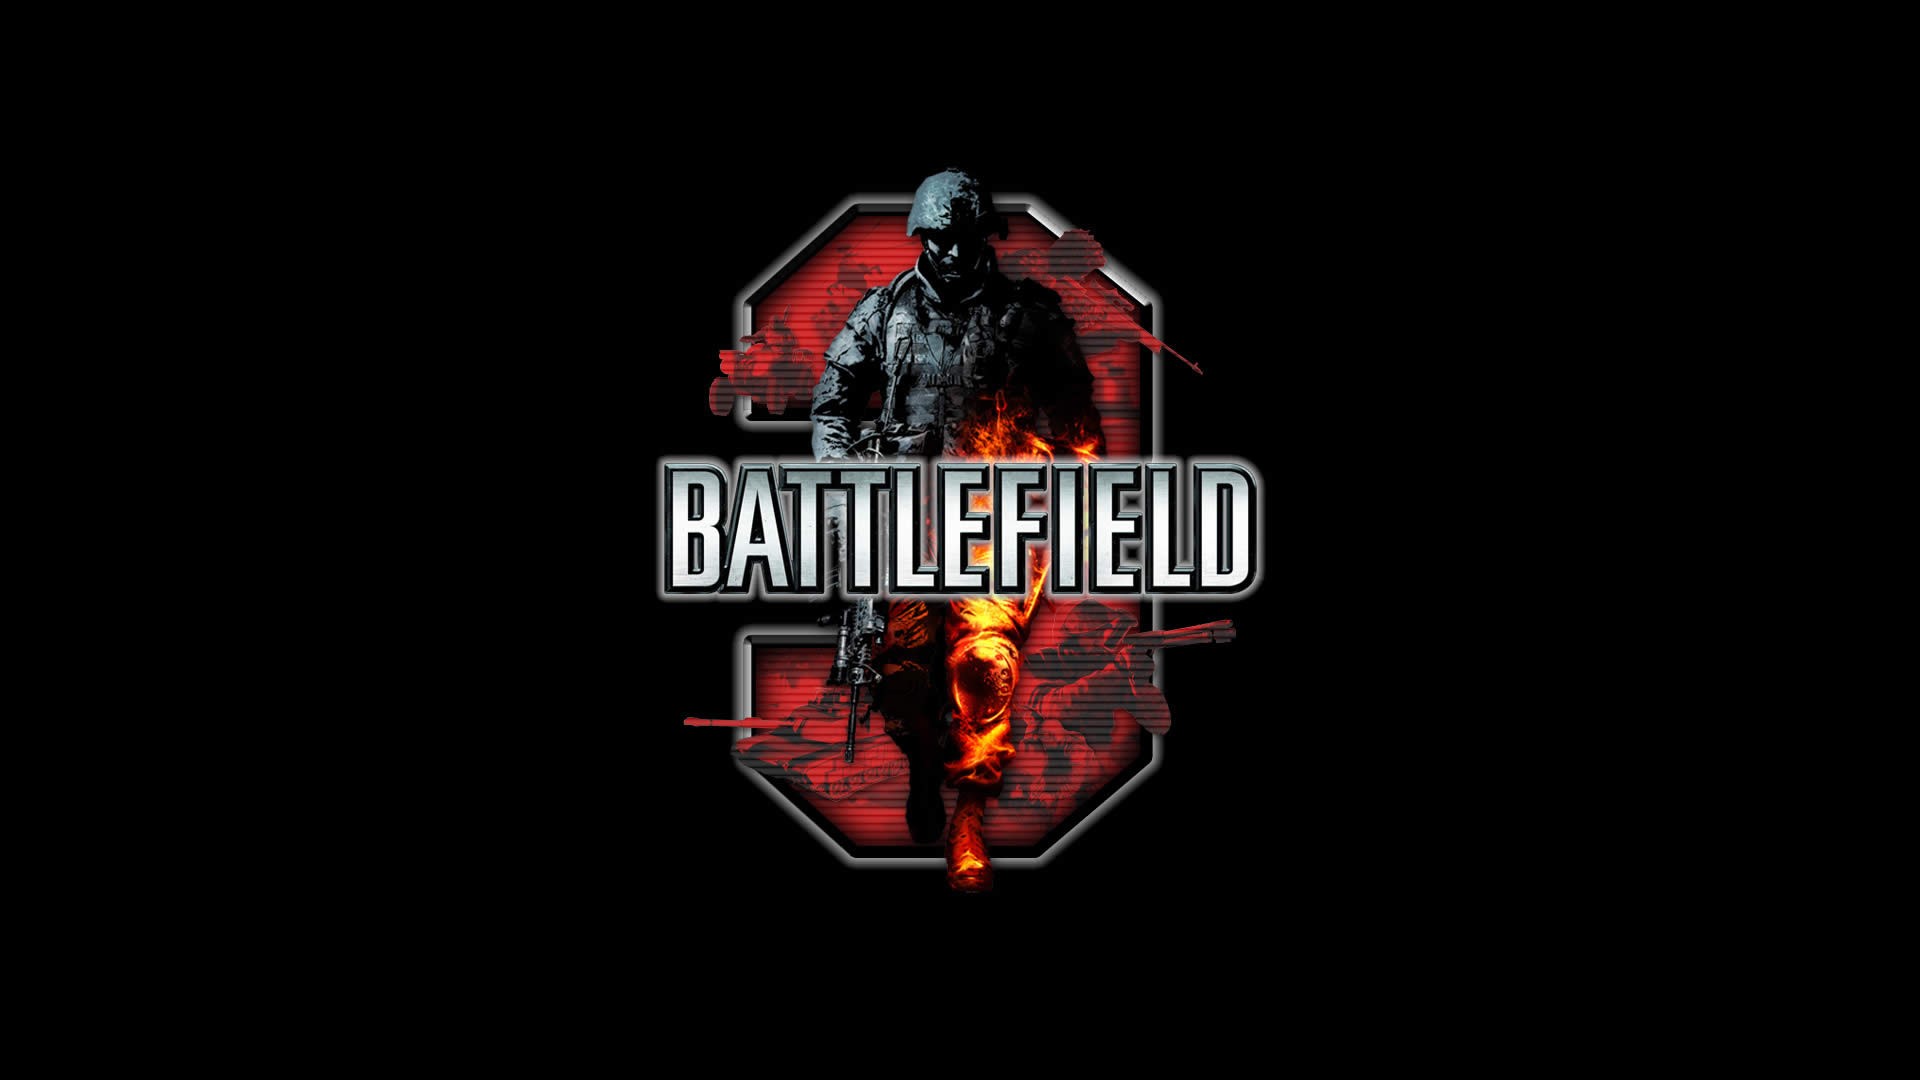 General 1920x1080 Battlefield 3 video games black PC gaming simple background black background